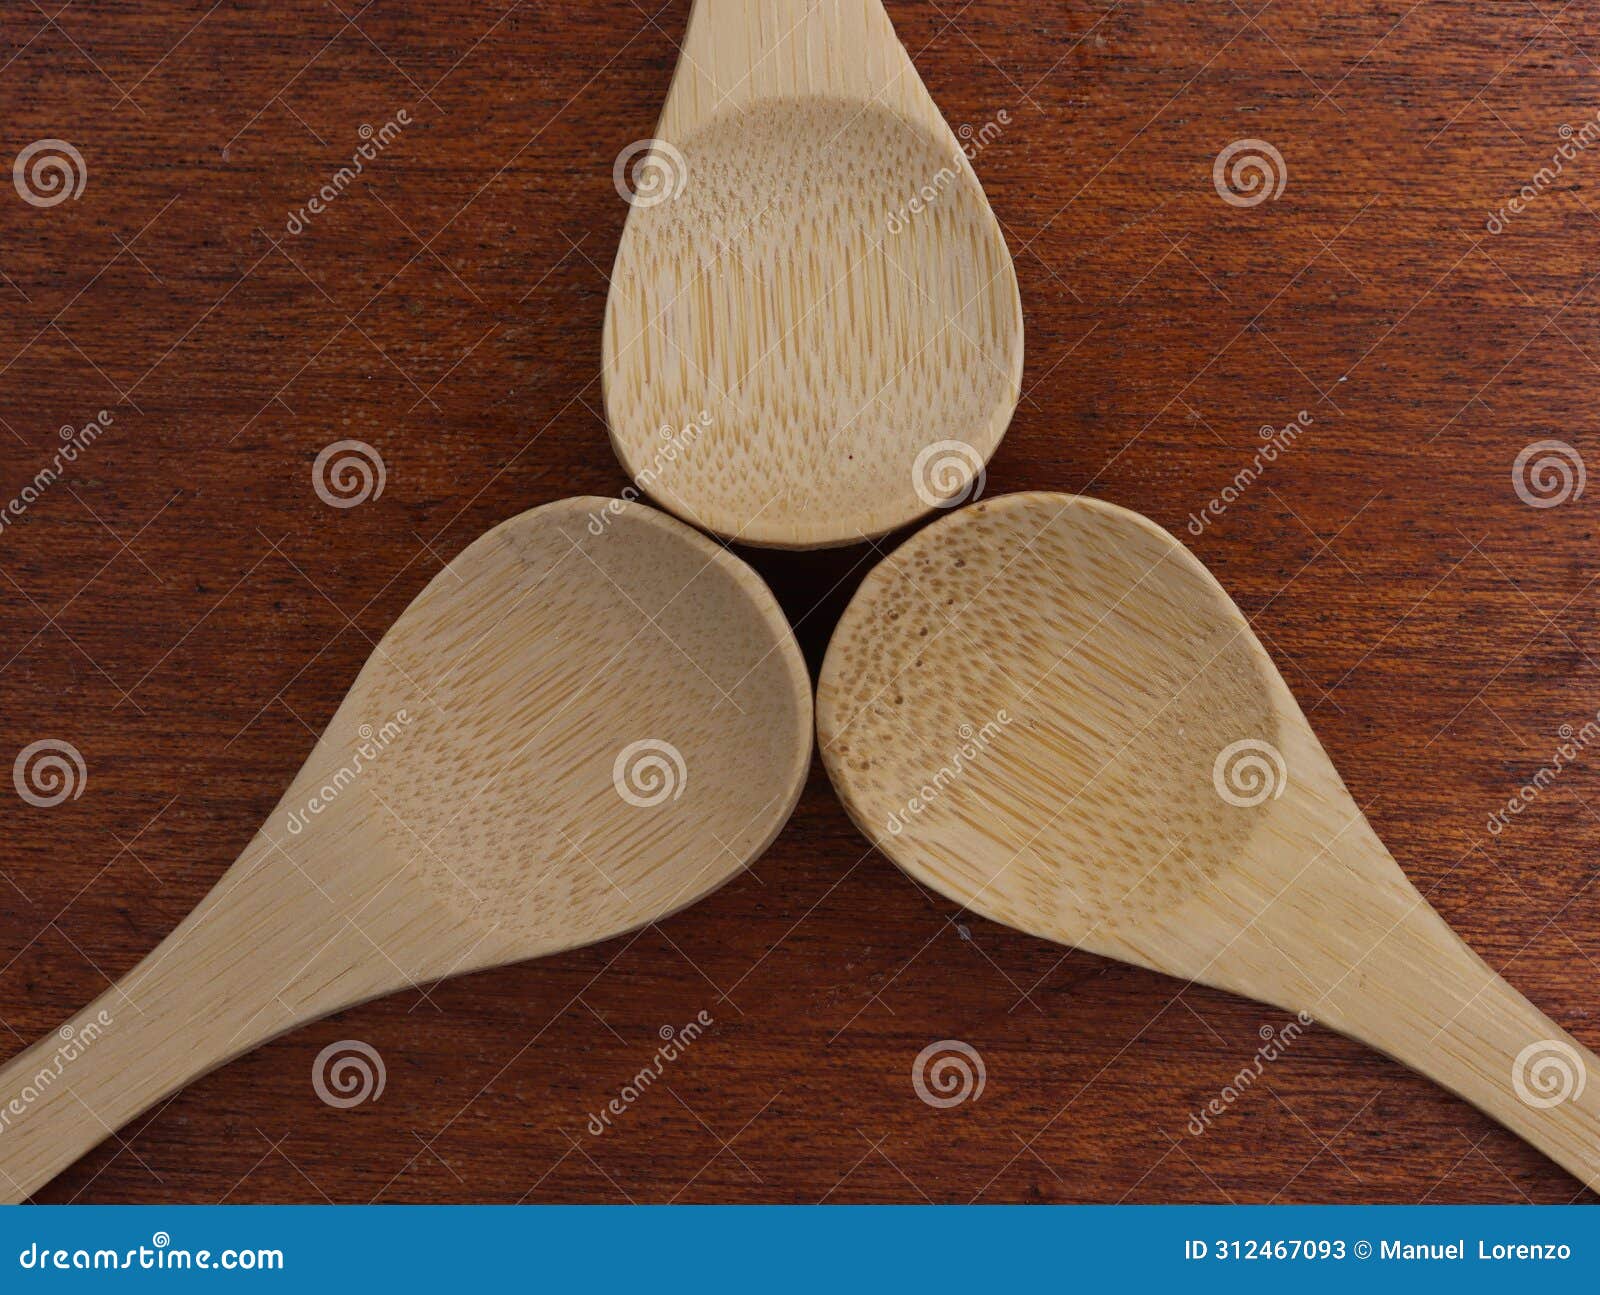 handmade wooden spoons natural industry kitchen food